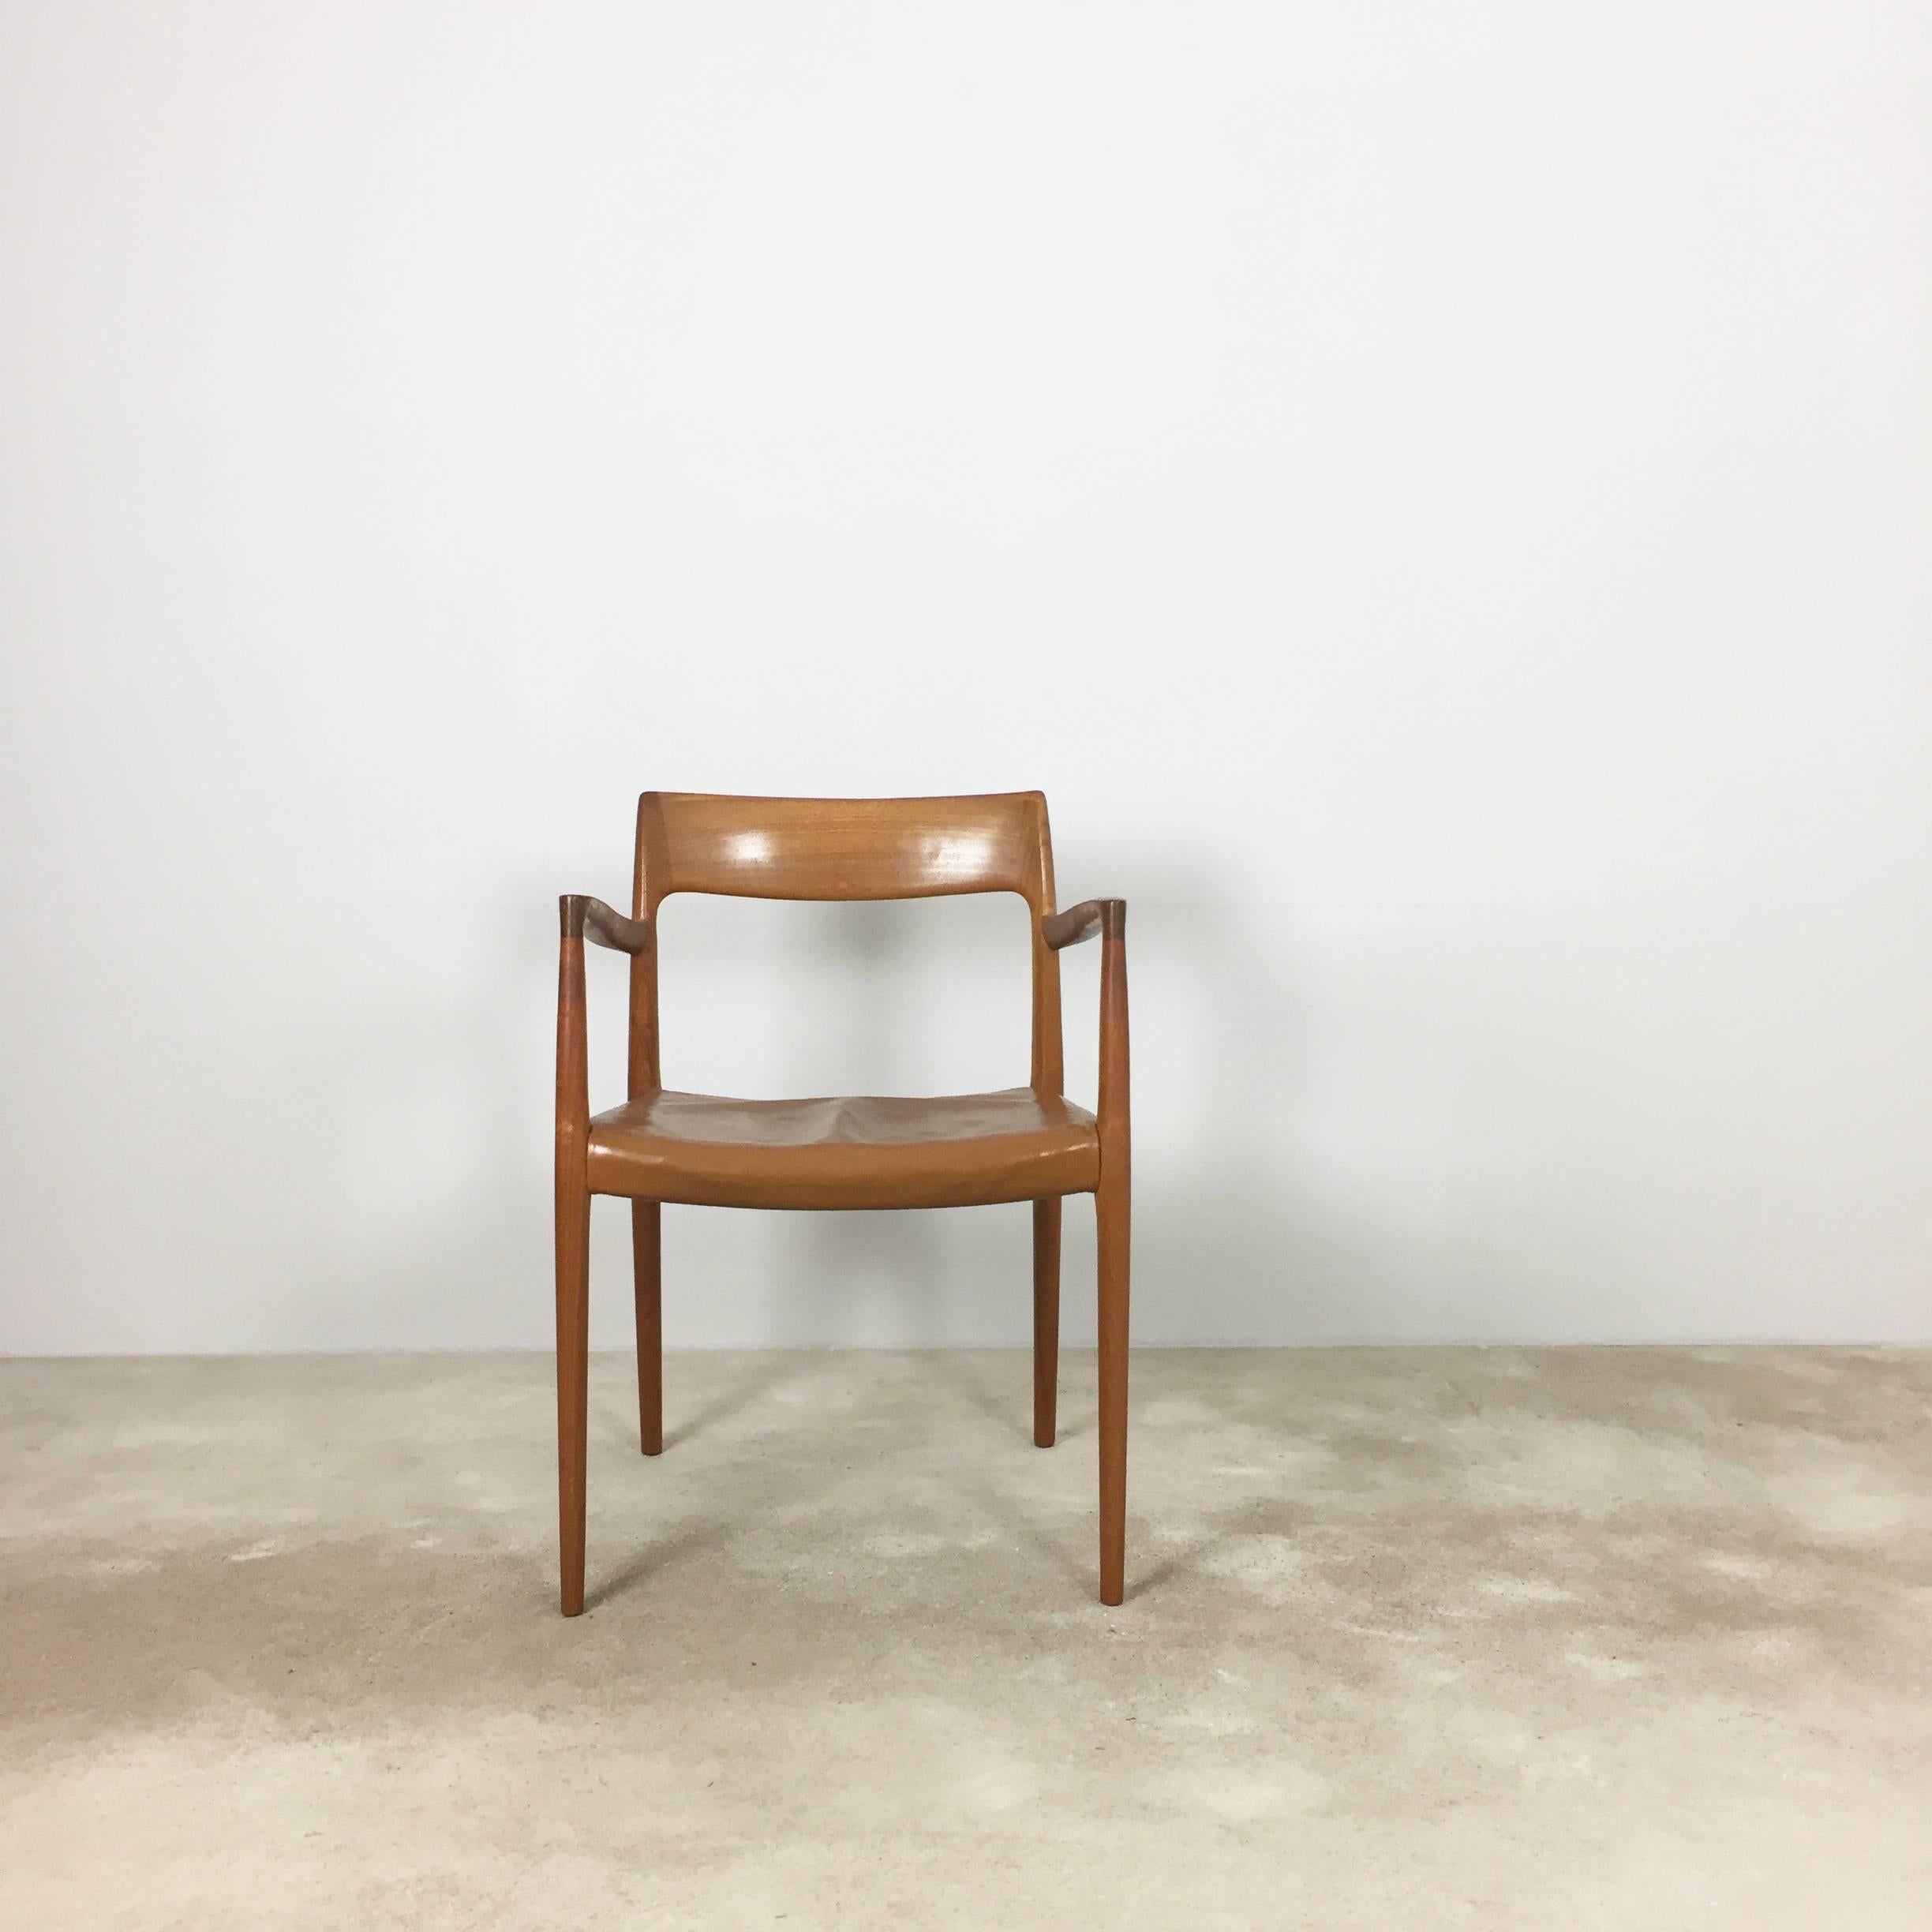 Article:

Teak armchair model 77


Design:

Niels O. Möller


Producer:

J. L. Möller Models A/S, Denmark


Decade:

1960s


This chair was designed by Niels O. Møller and manufactured in Denmark by J.L. Møller A/S. It is made